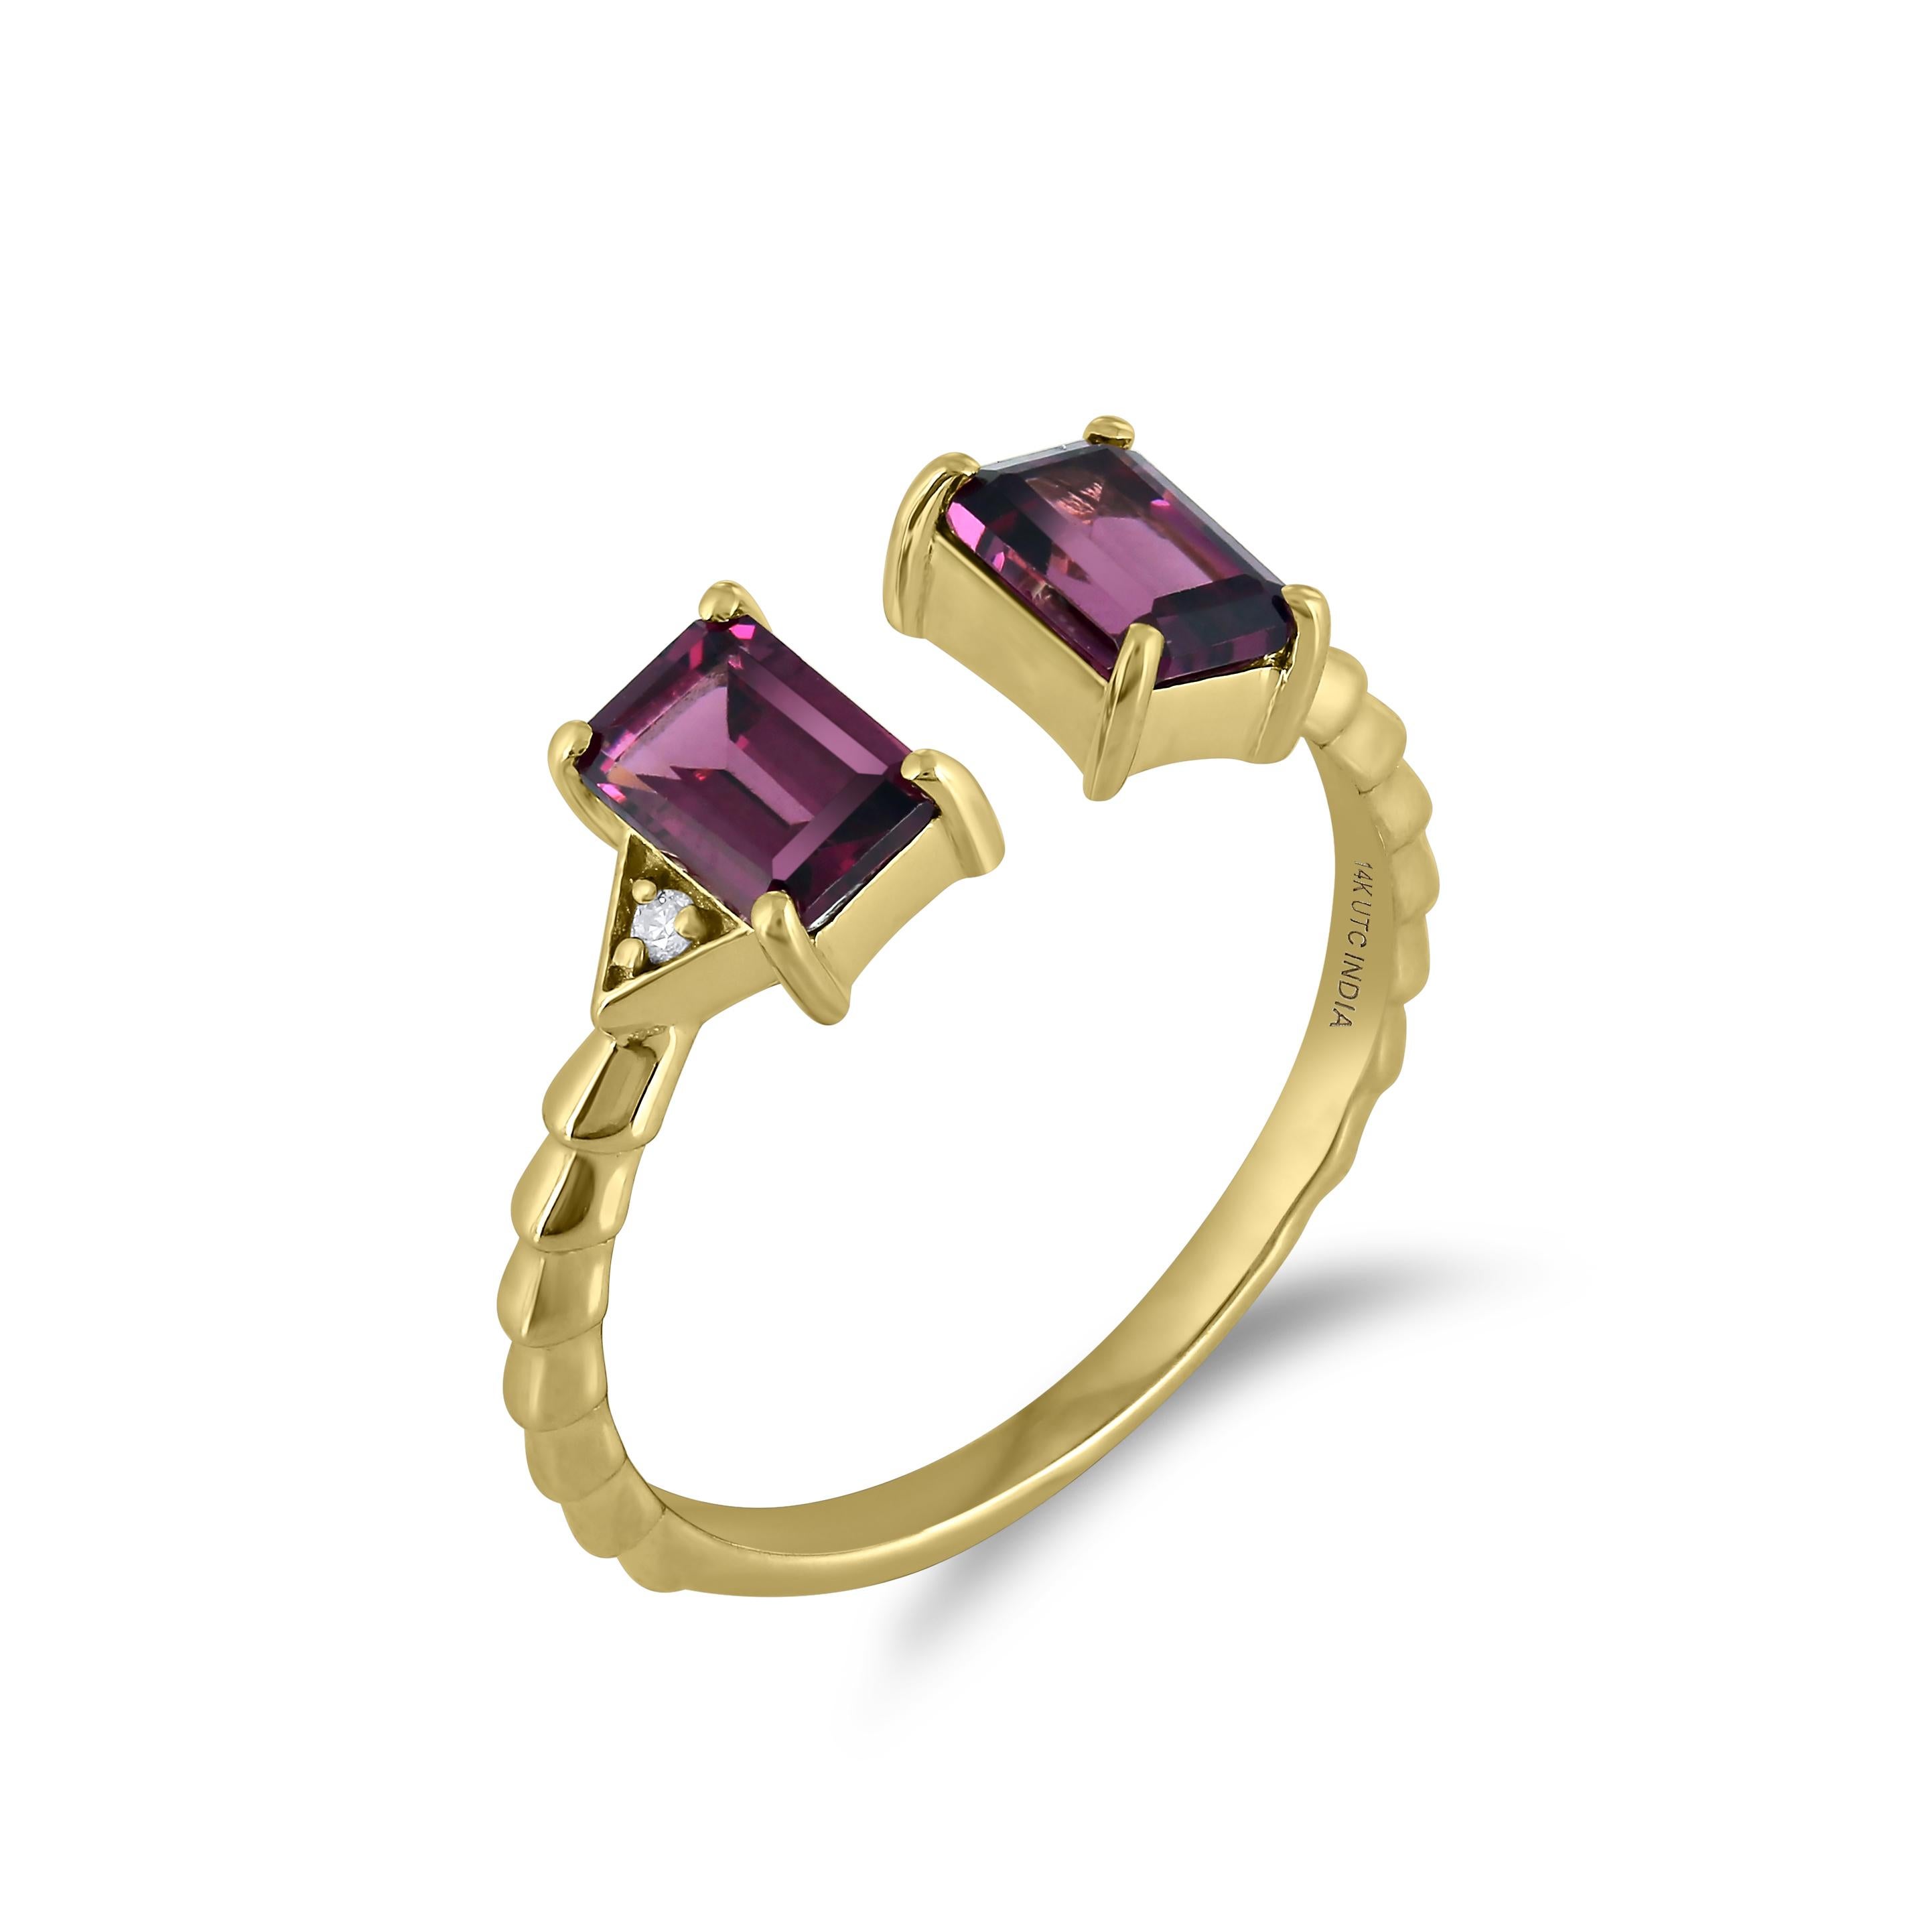 Lovingly known as the “all purpose stone”, two octagon-cut protective Rhodolite stones in a prong setting are affixed on the 14K Yellow Gold cuff ring. The diamonds are I1 in clarity, and GH in color, weighing 0.02 Cts. Two round full-cut White